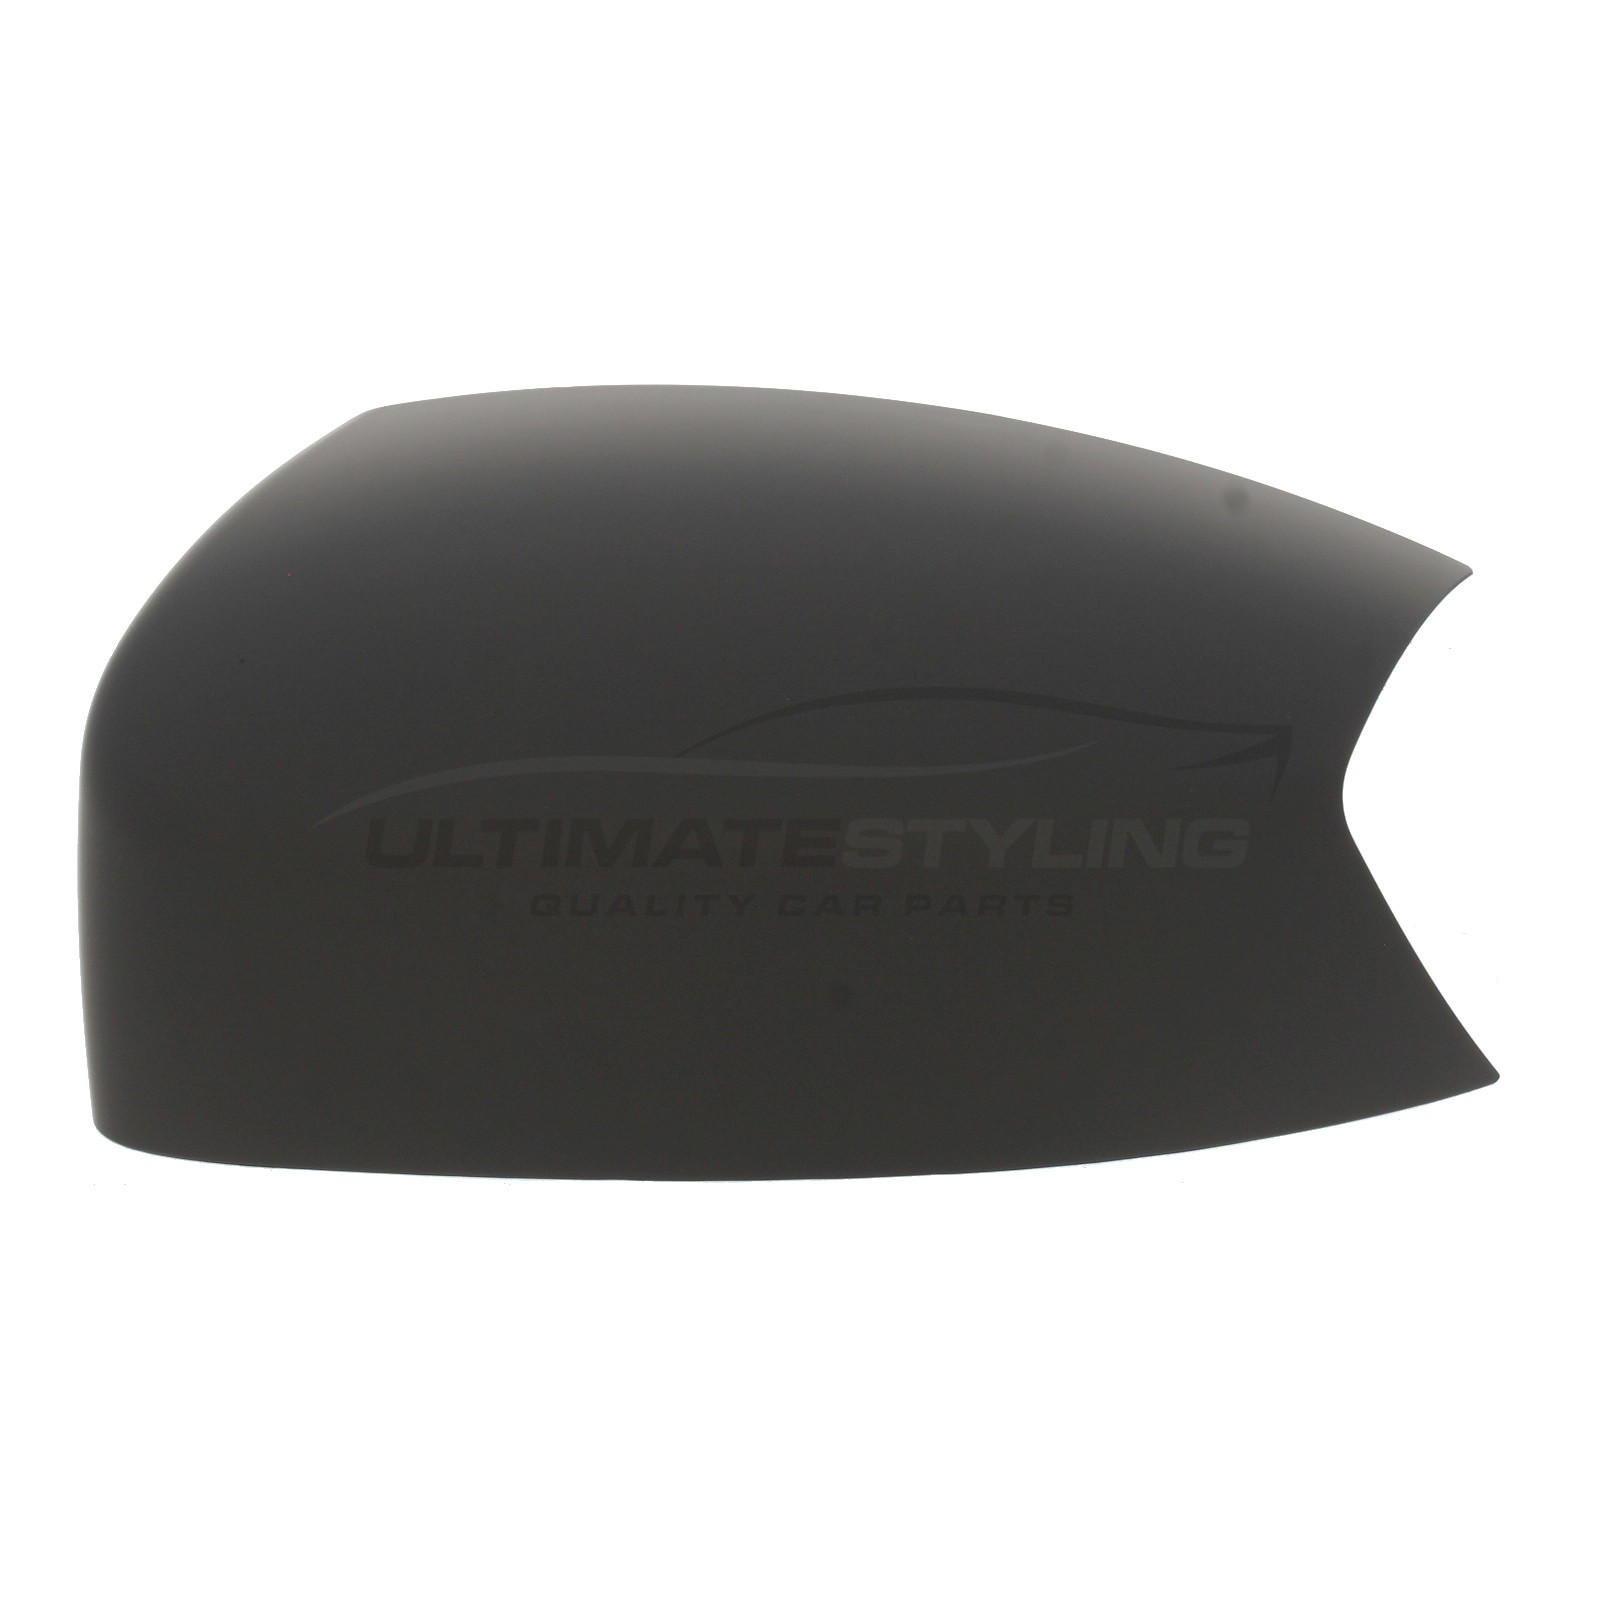 Ford C-MAX 2010-2019, Ford Galaxy 2006-2016, Ford Kuga 2008-2013, Ford S-MAX 2006-2016 Wing Mirror Cover Cap Casing Primed Passenger Side (LH)